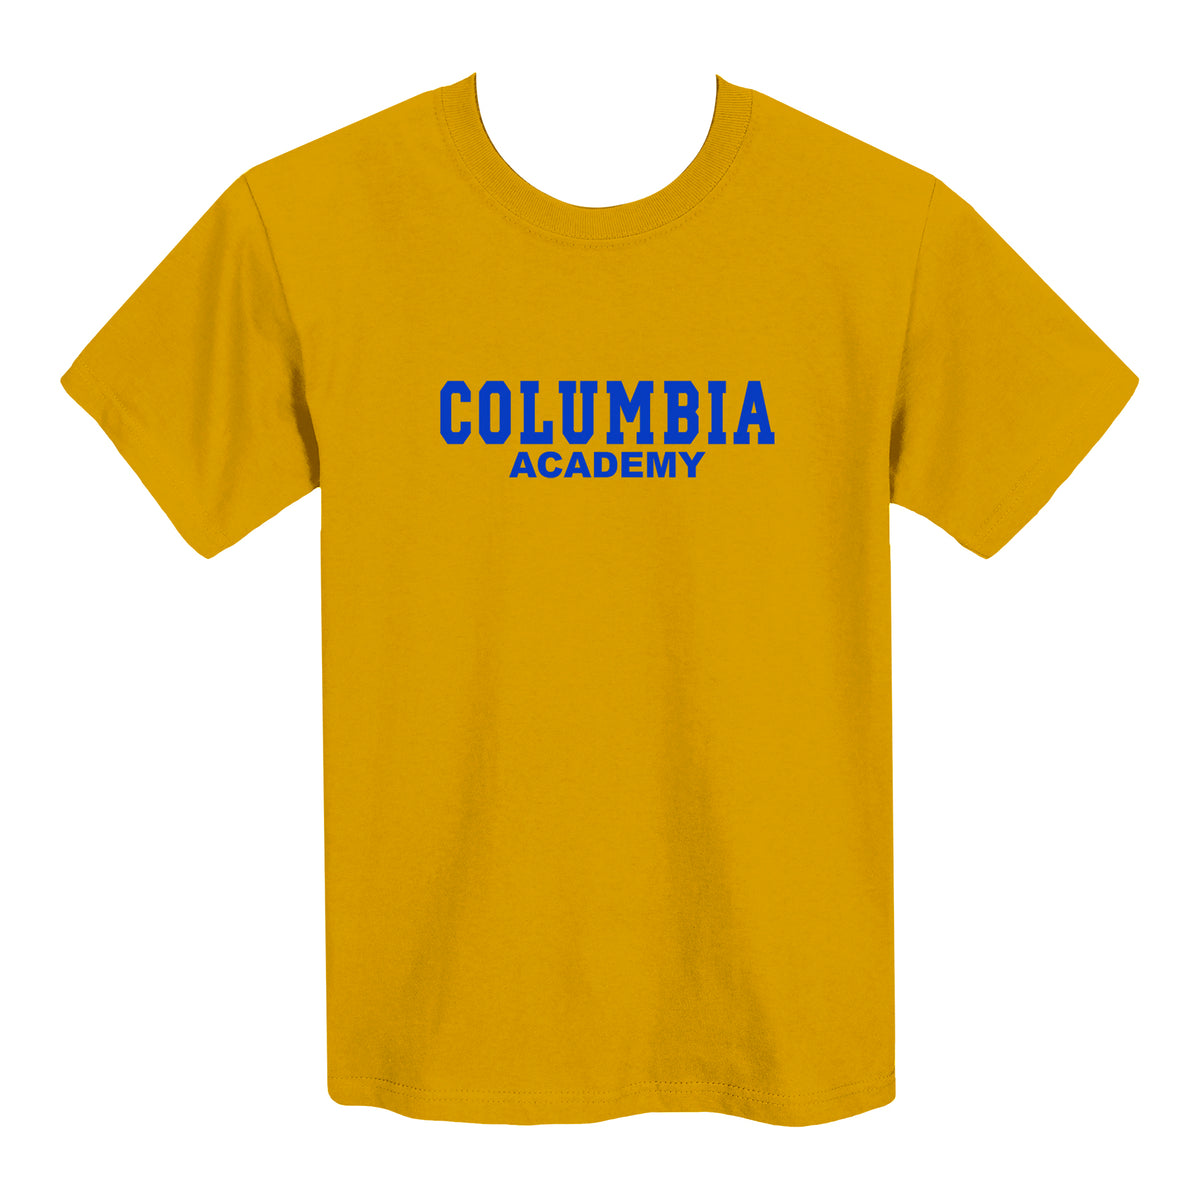 COLUMBIA ACADEMY GYM T-SHIRT, COTTON, YOUTH